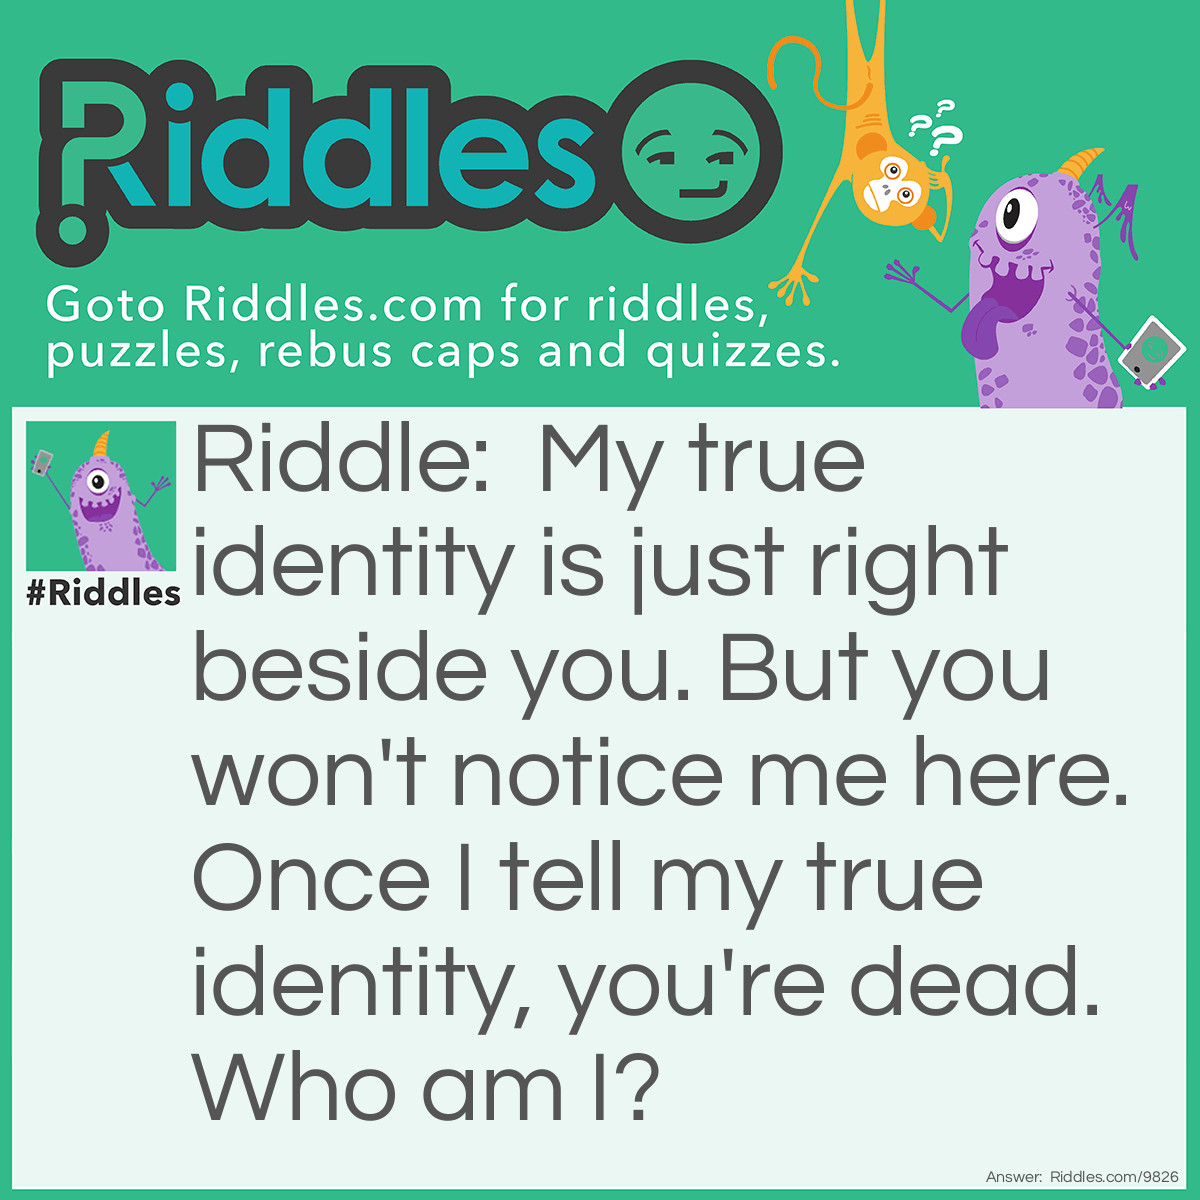 Riddle: My true identity is just right beside you. But you won't notice me here. Once I tell you my true identity, you're dead. <a href="/who-am-i-riddles">Who am I</a>? Answer: A traitor.